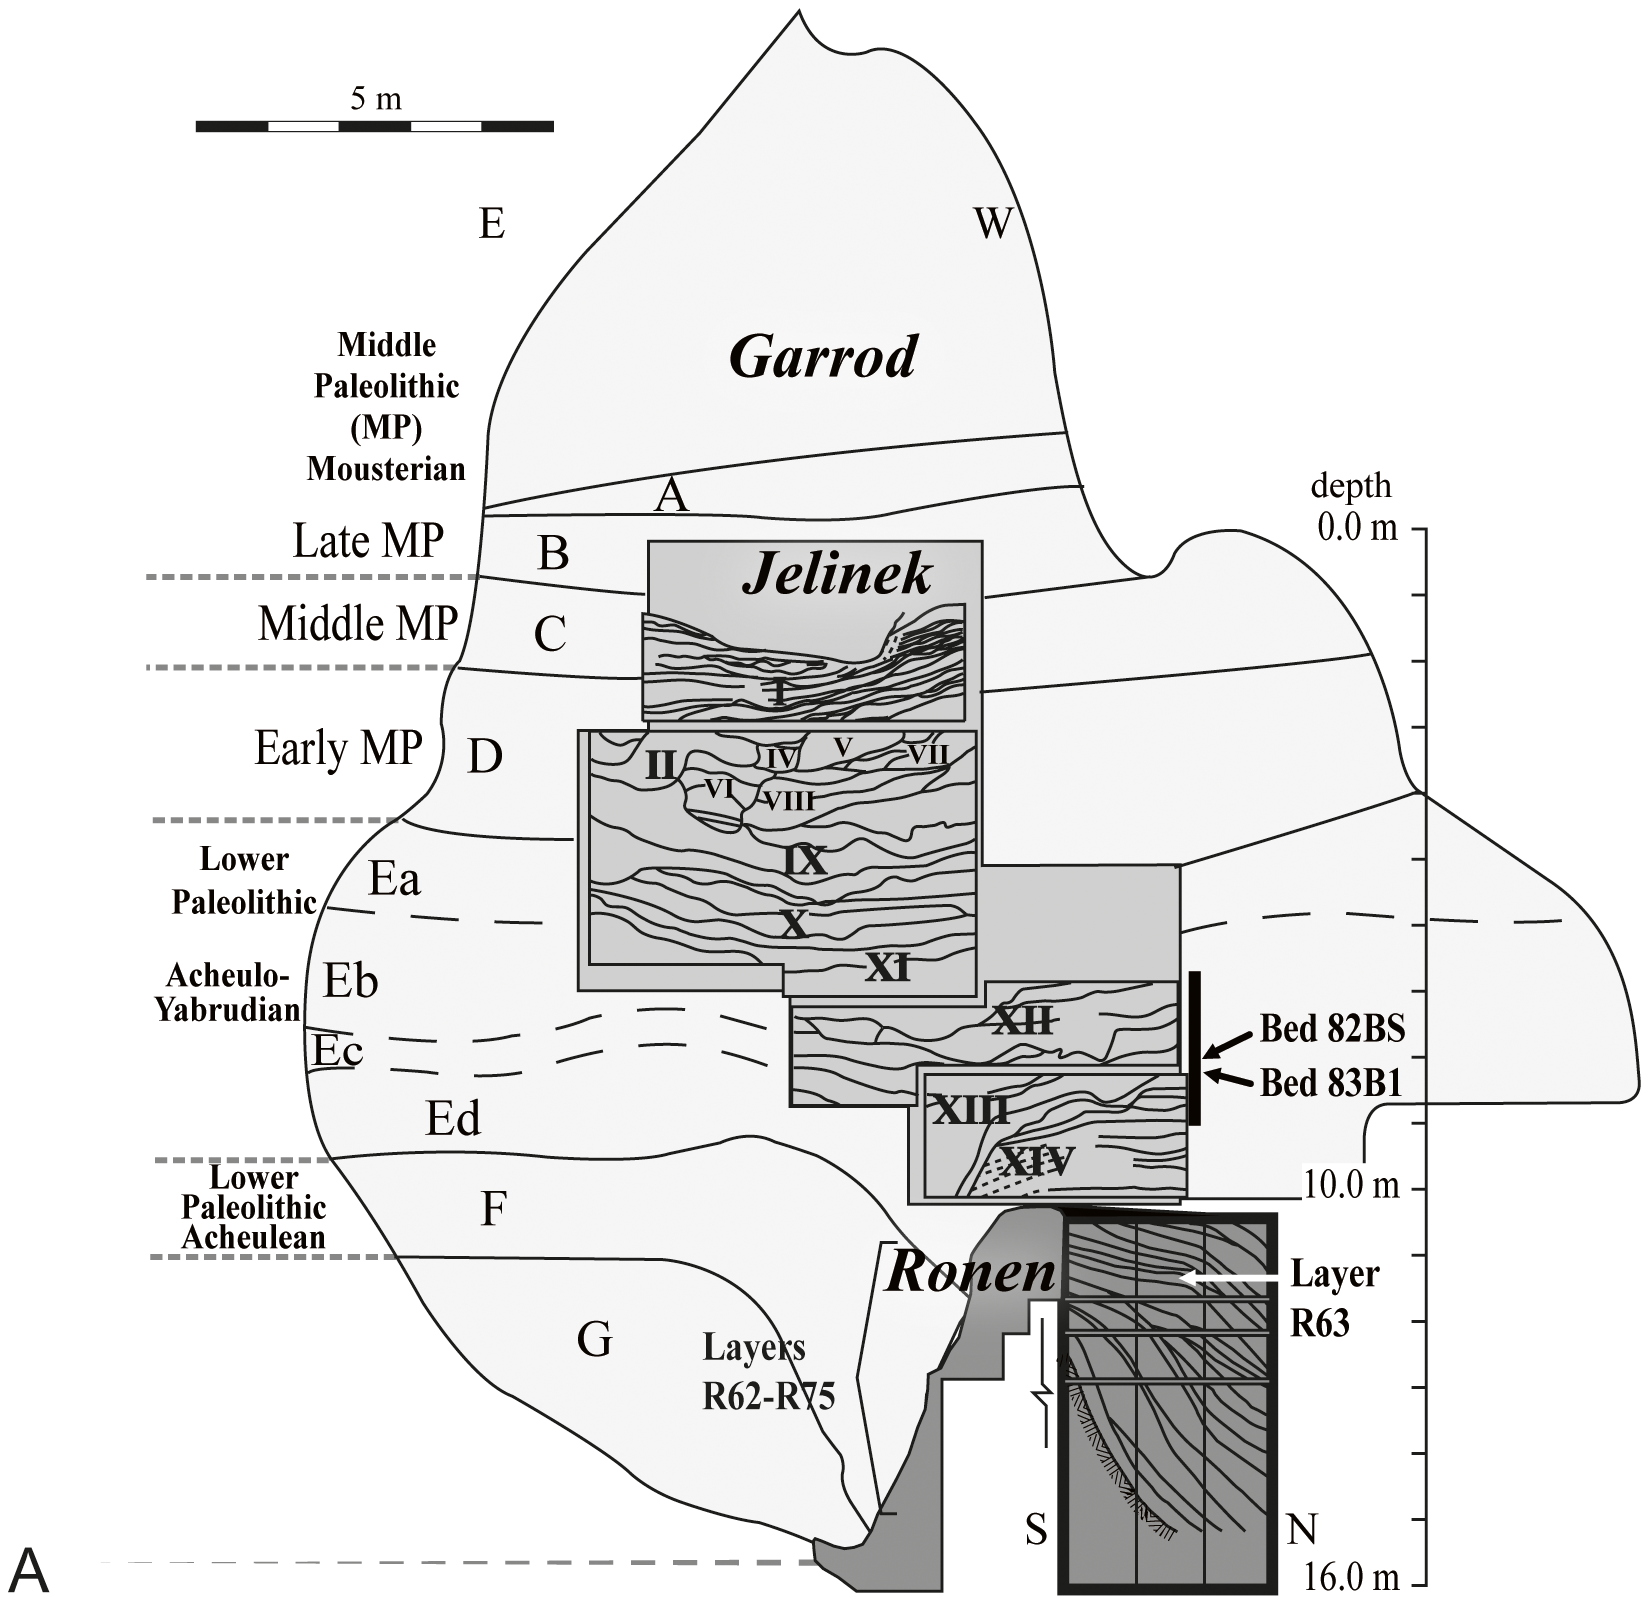 Figure 2 Tabun section showing the general location of the studied samples.